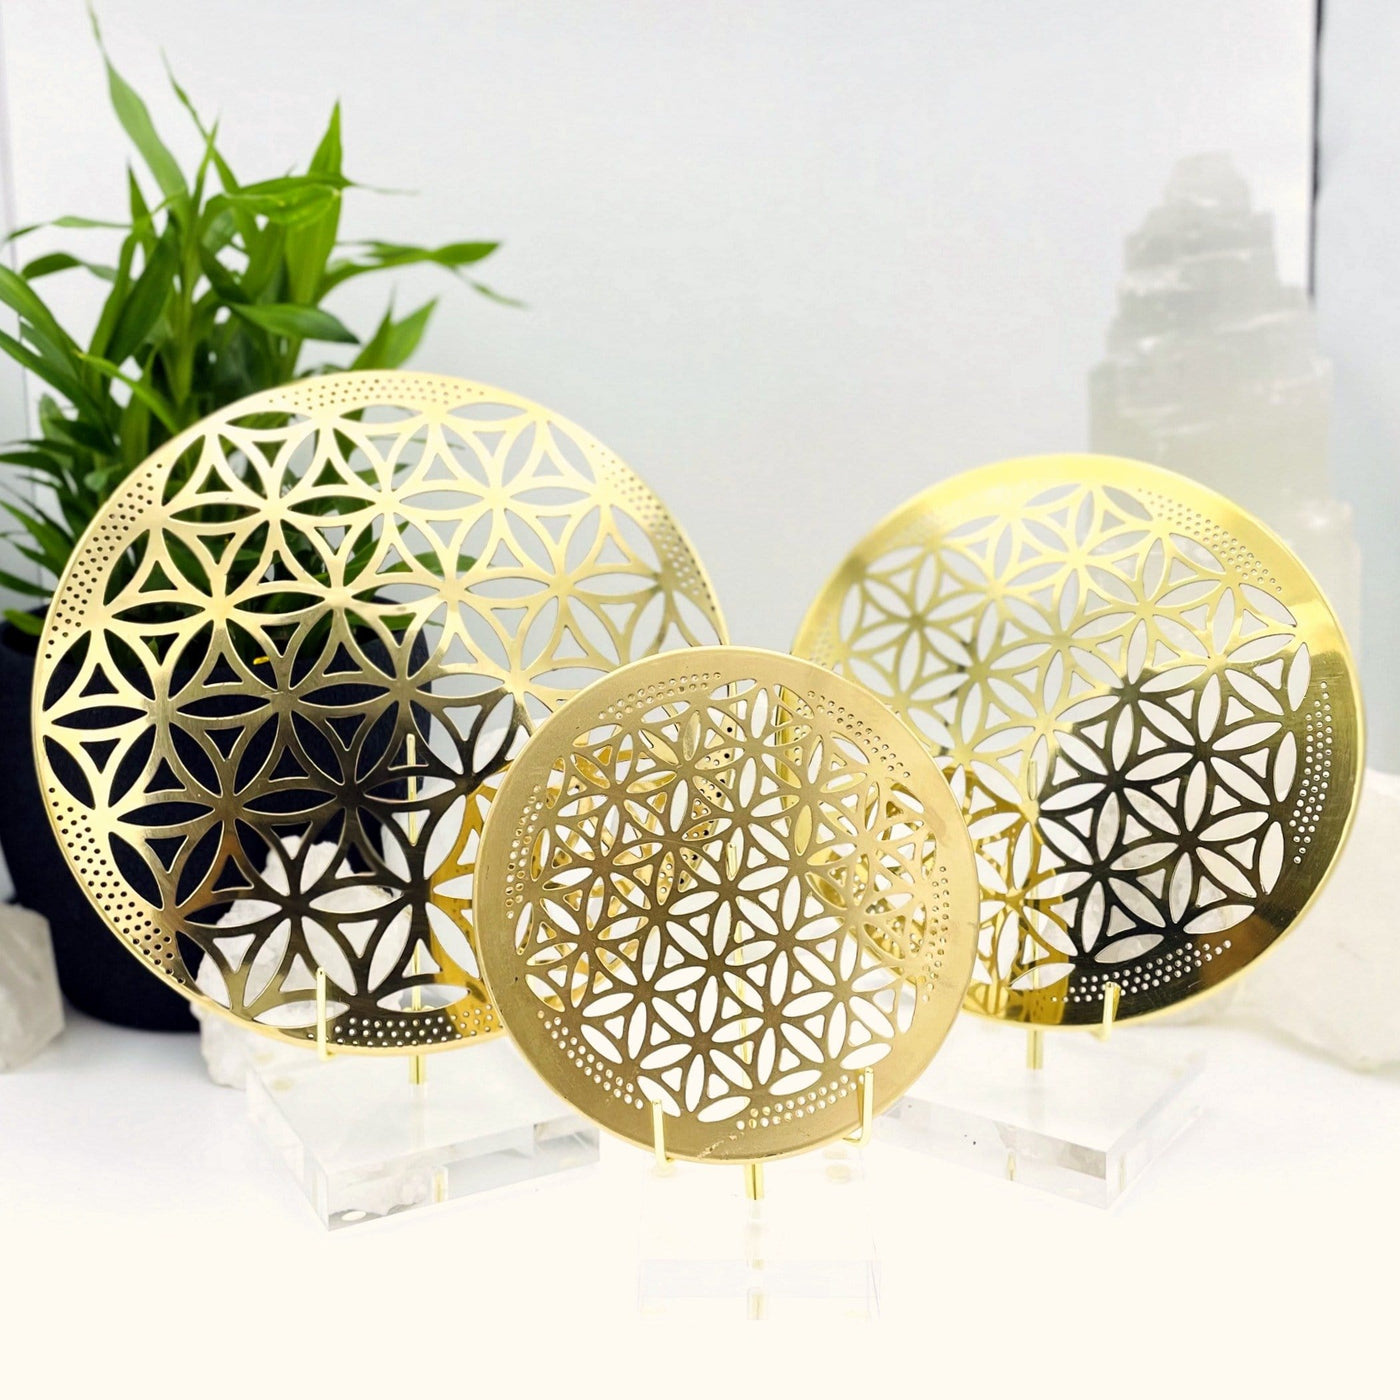 Flower of Life Grid three different sizes standing.